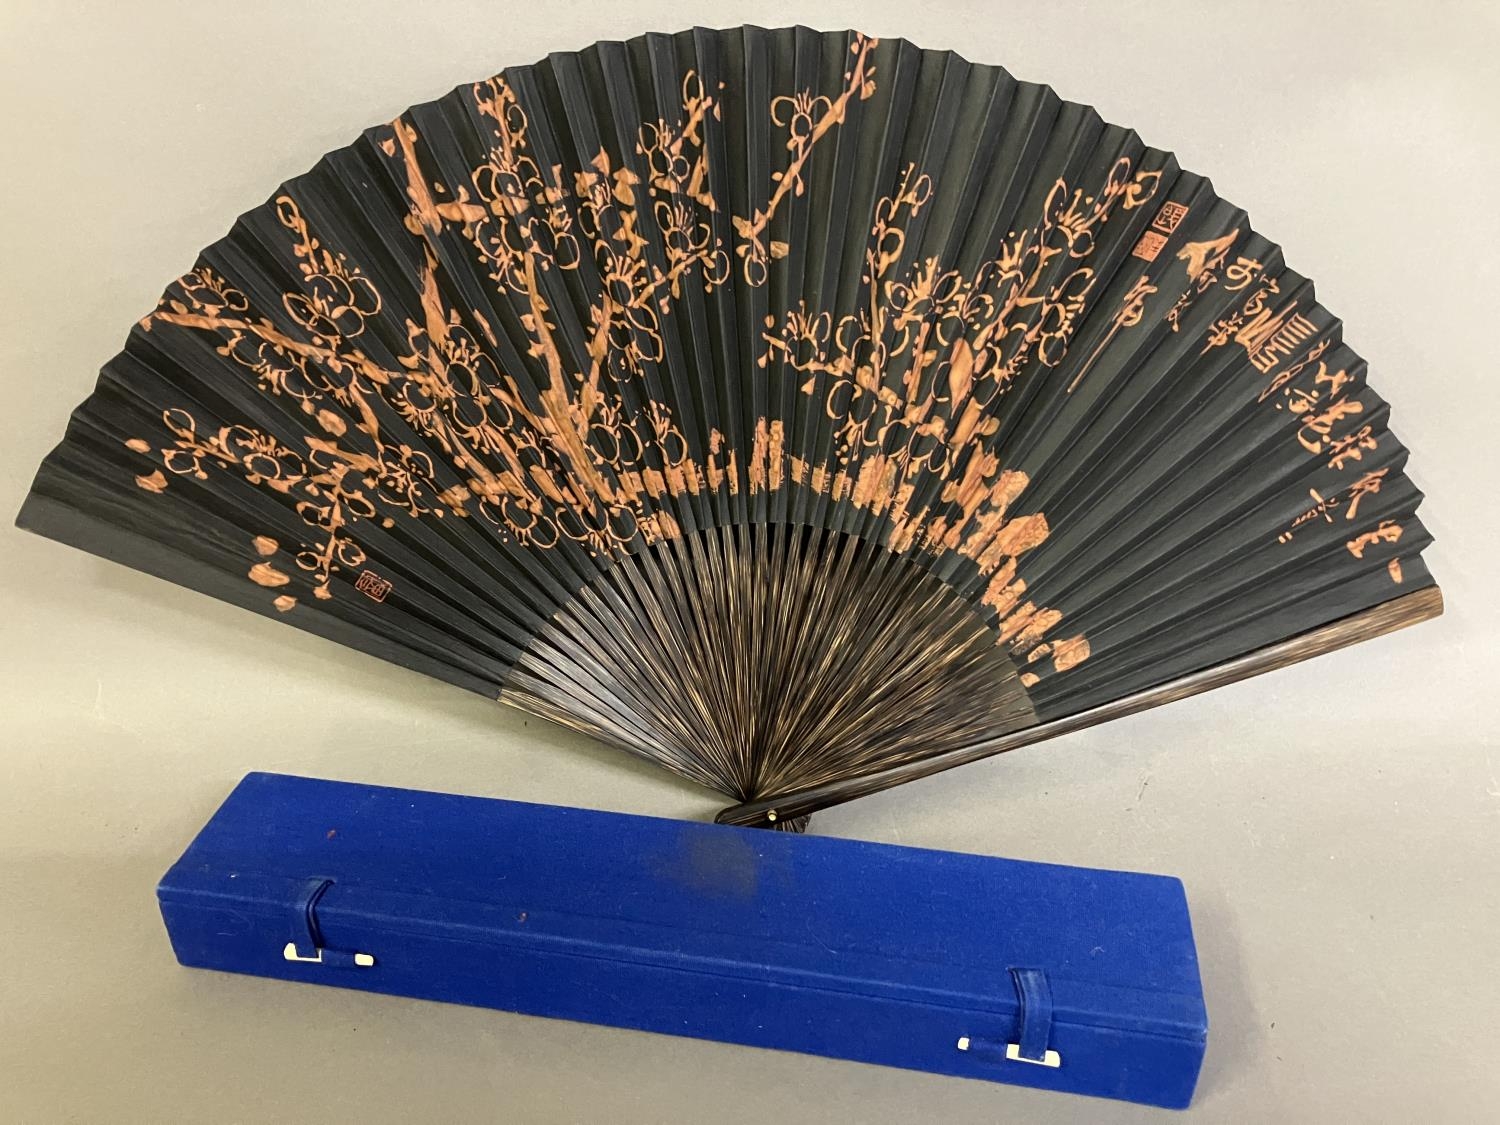 An original fan by Chinese Master Artist Fu Hua, 20th century, the recto painted with flowering